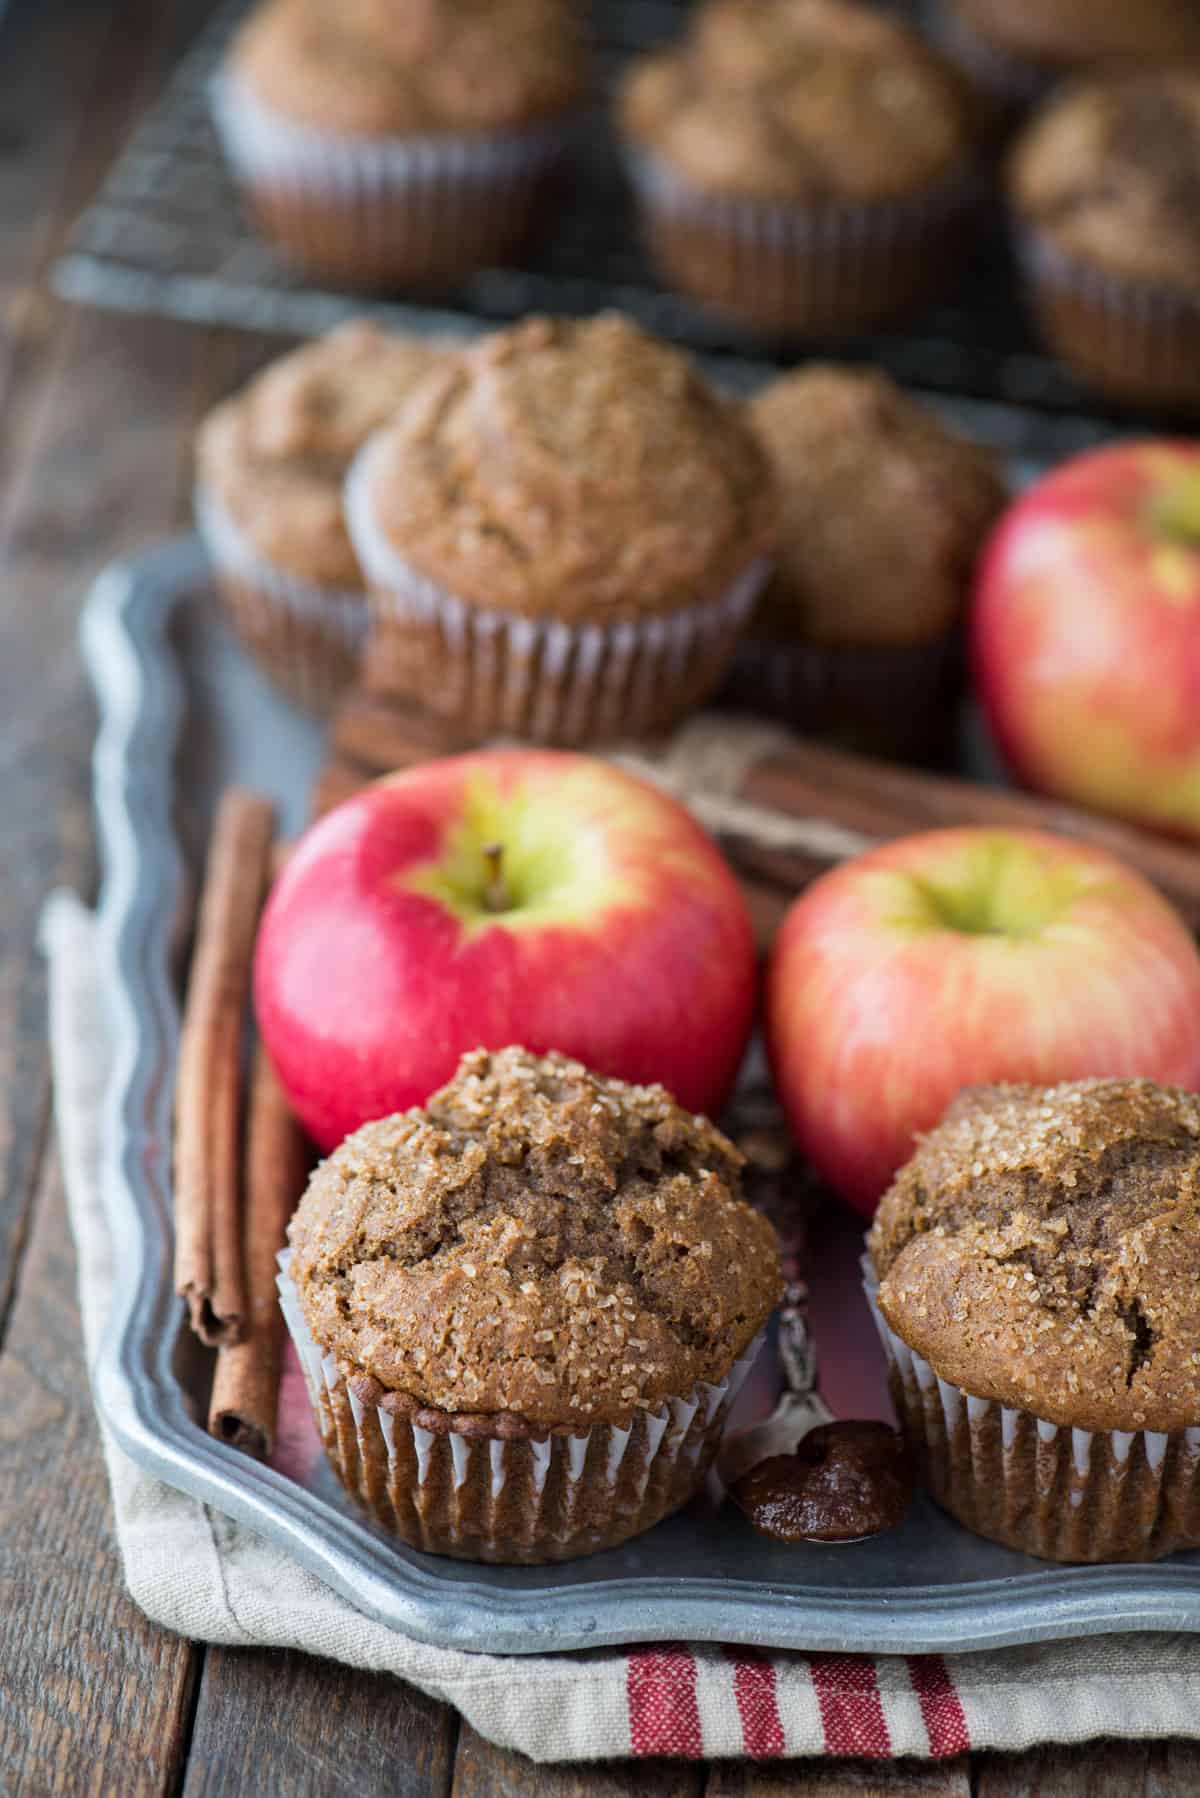 apple butter muffins on metal serving tray with apples and tan and red striped towel